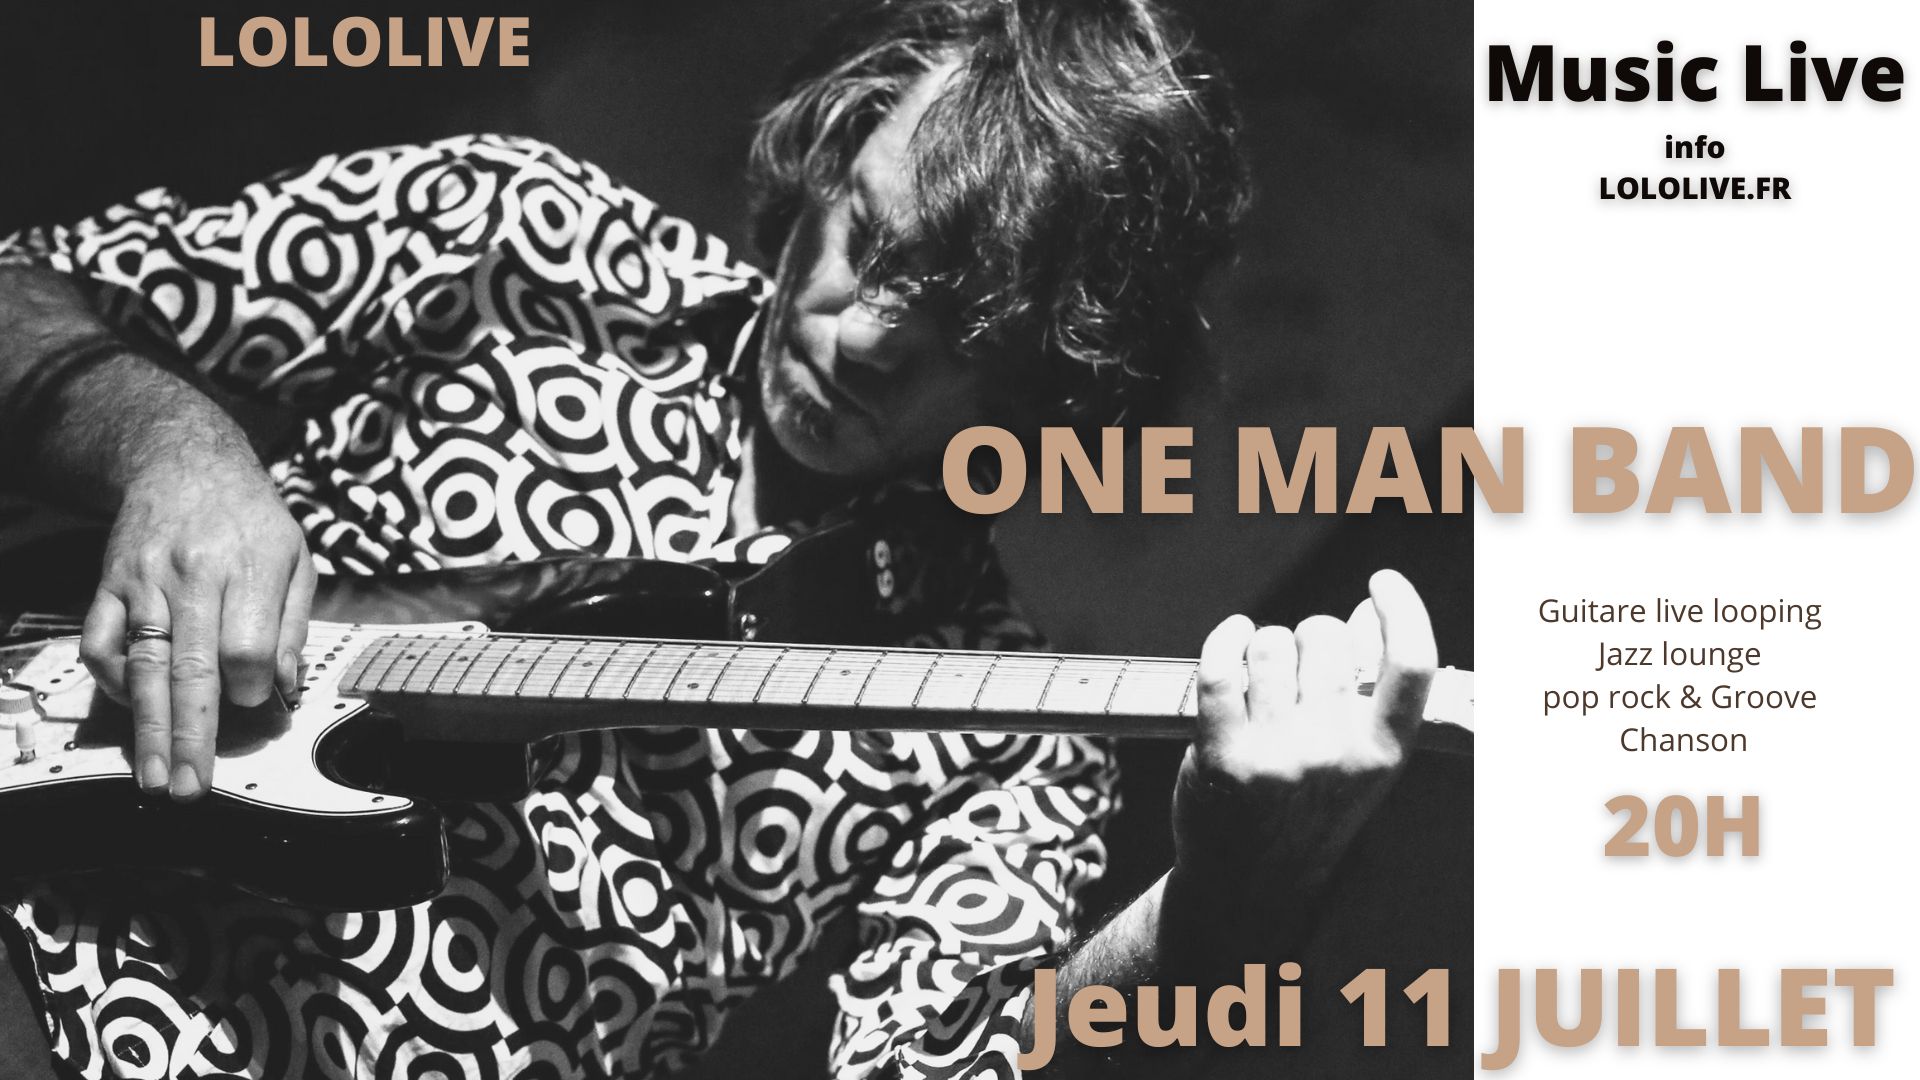 One Man Band LoloLive